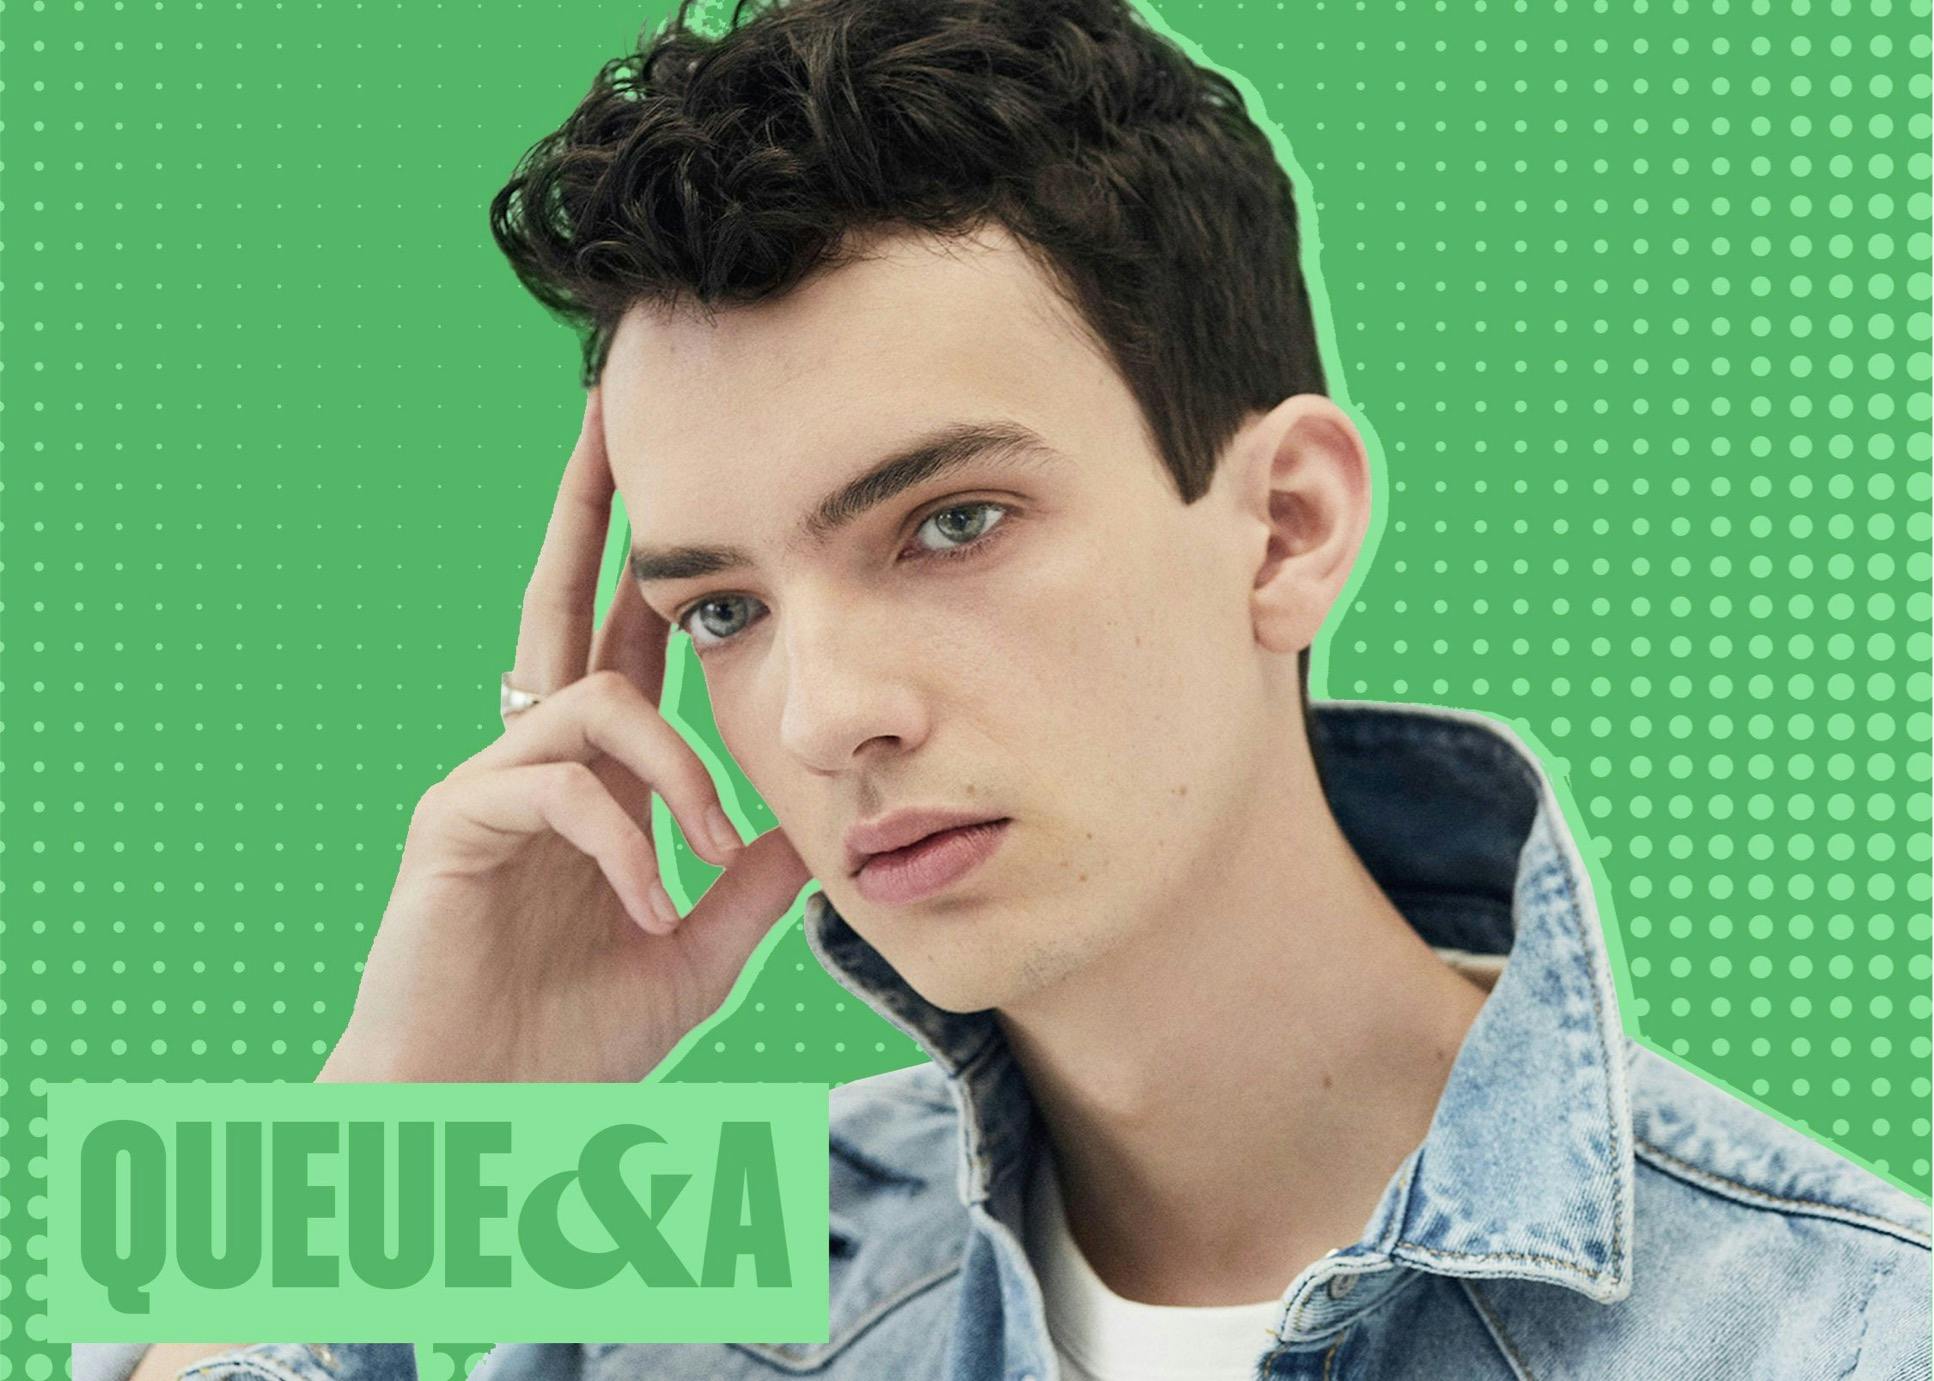 Kodi Smit-McPhee wears a denim shirt with a white t-shirt underneath. He raises his fingers to his temple. The background is green speckled with lighter green and in the bottom left hand corner reads: Queue &A.